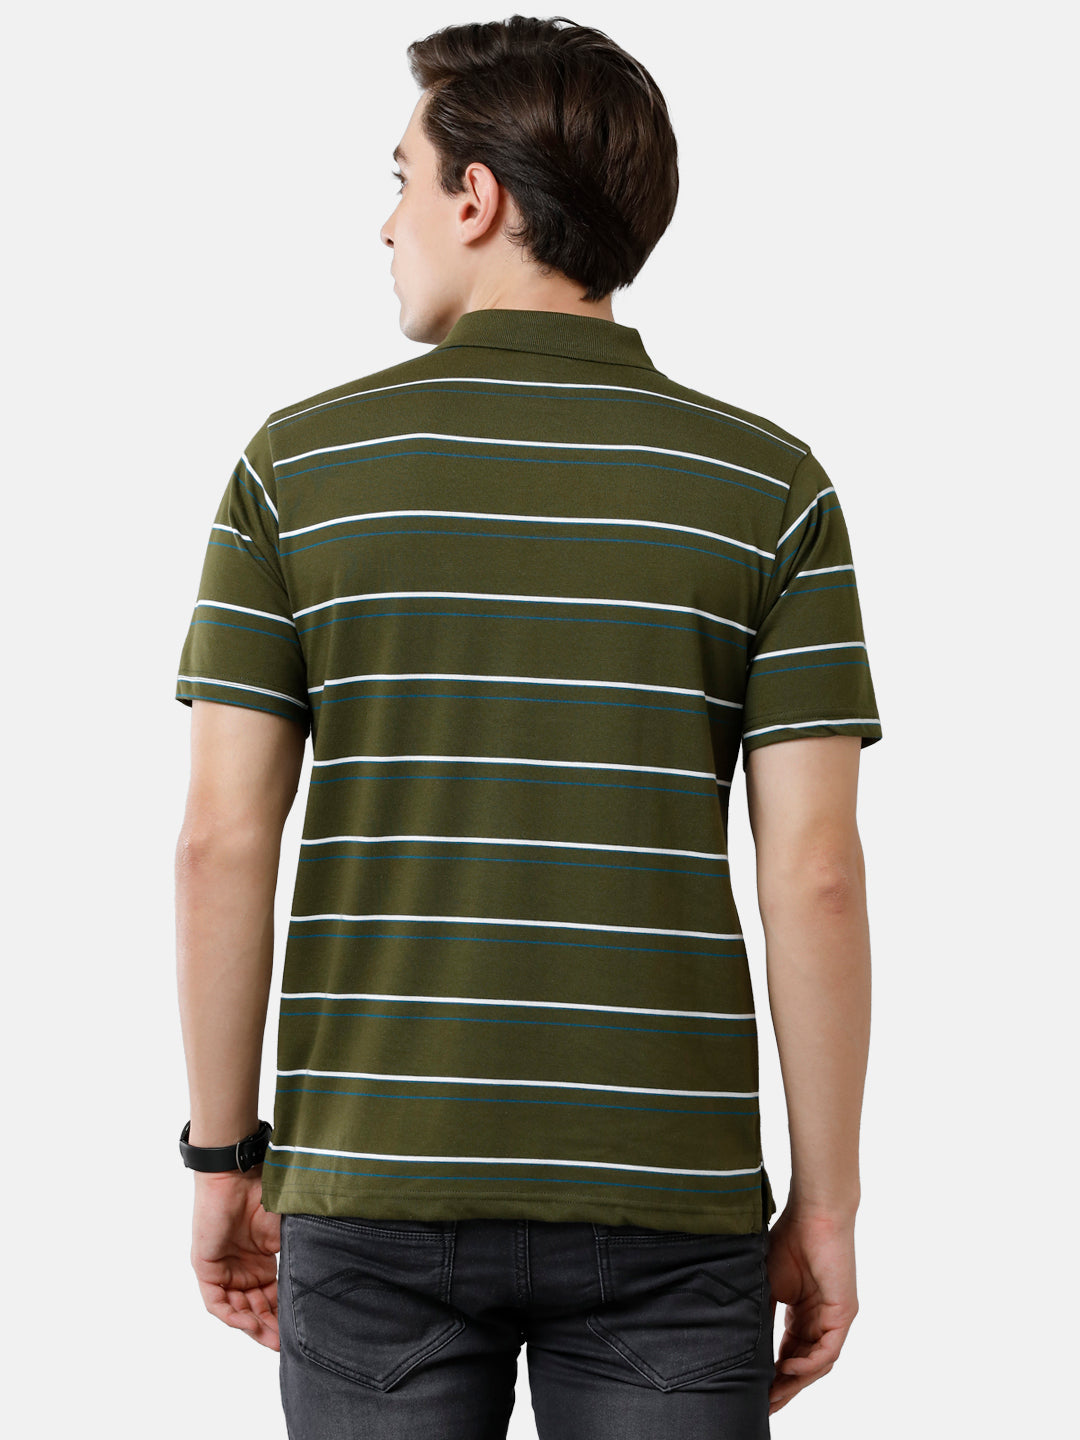 Classic Polo Mens Cotton Blend Half Sleeve Striped Authentic Fit Polo Neck Olive Green Color T-Shirt | Avon 484 A